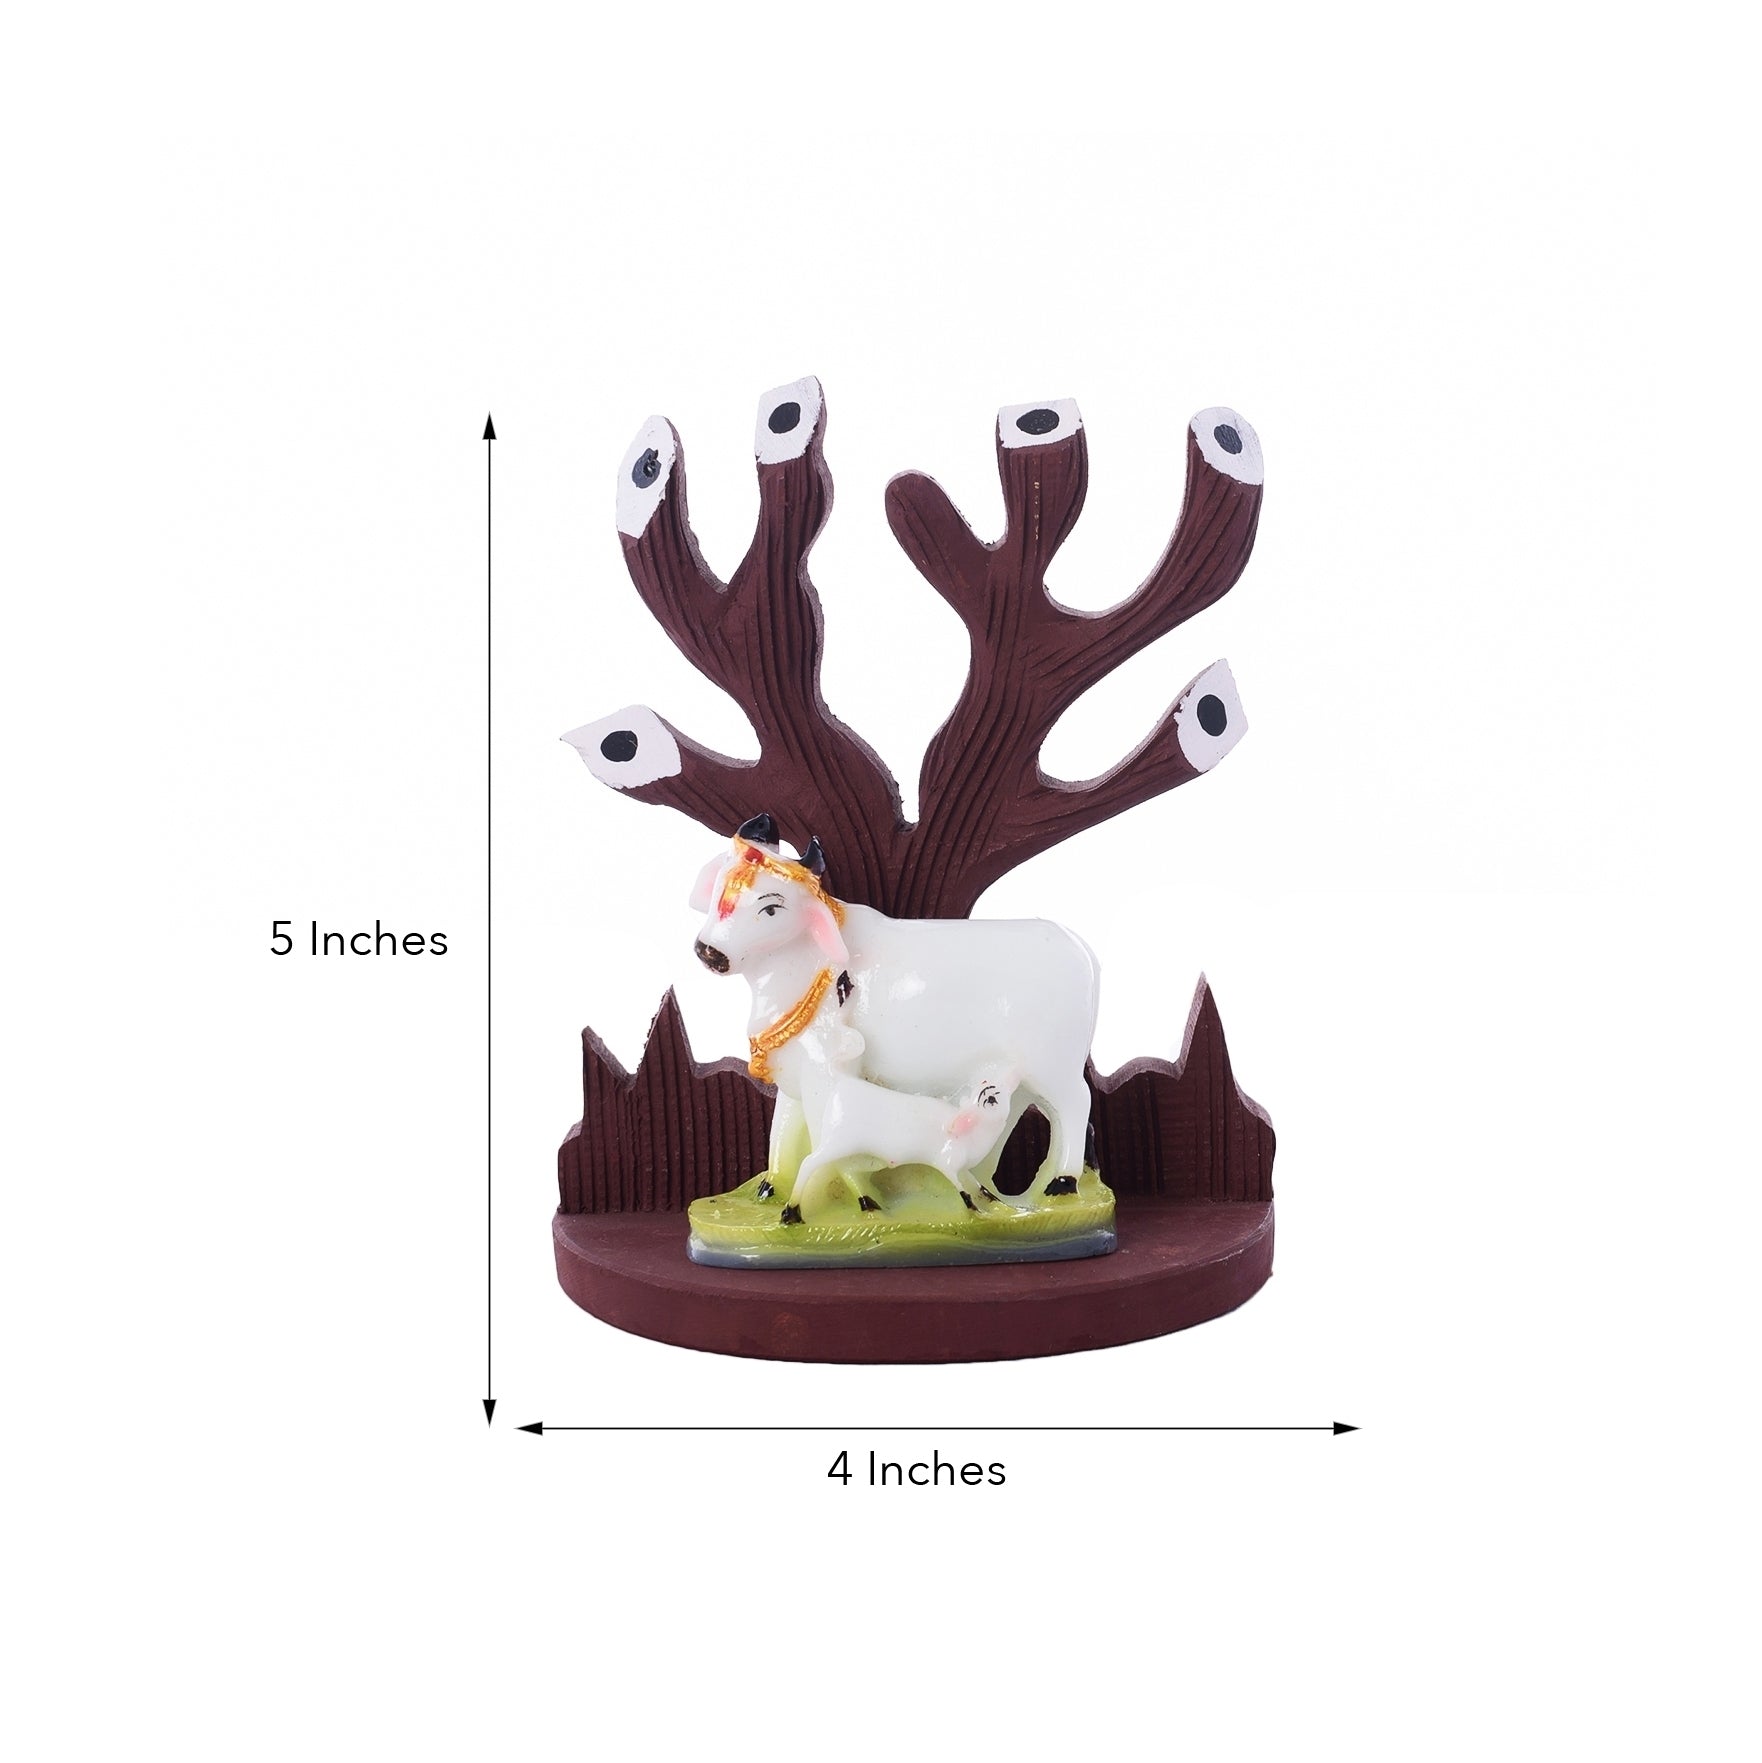 Polyresin Cow and Calf Under Wooden Tree Figurine 2